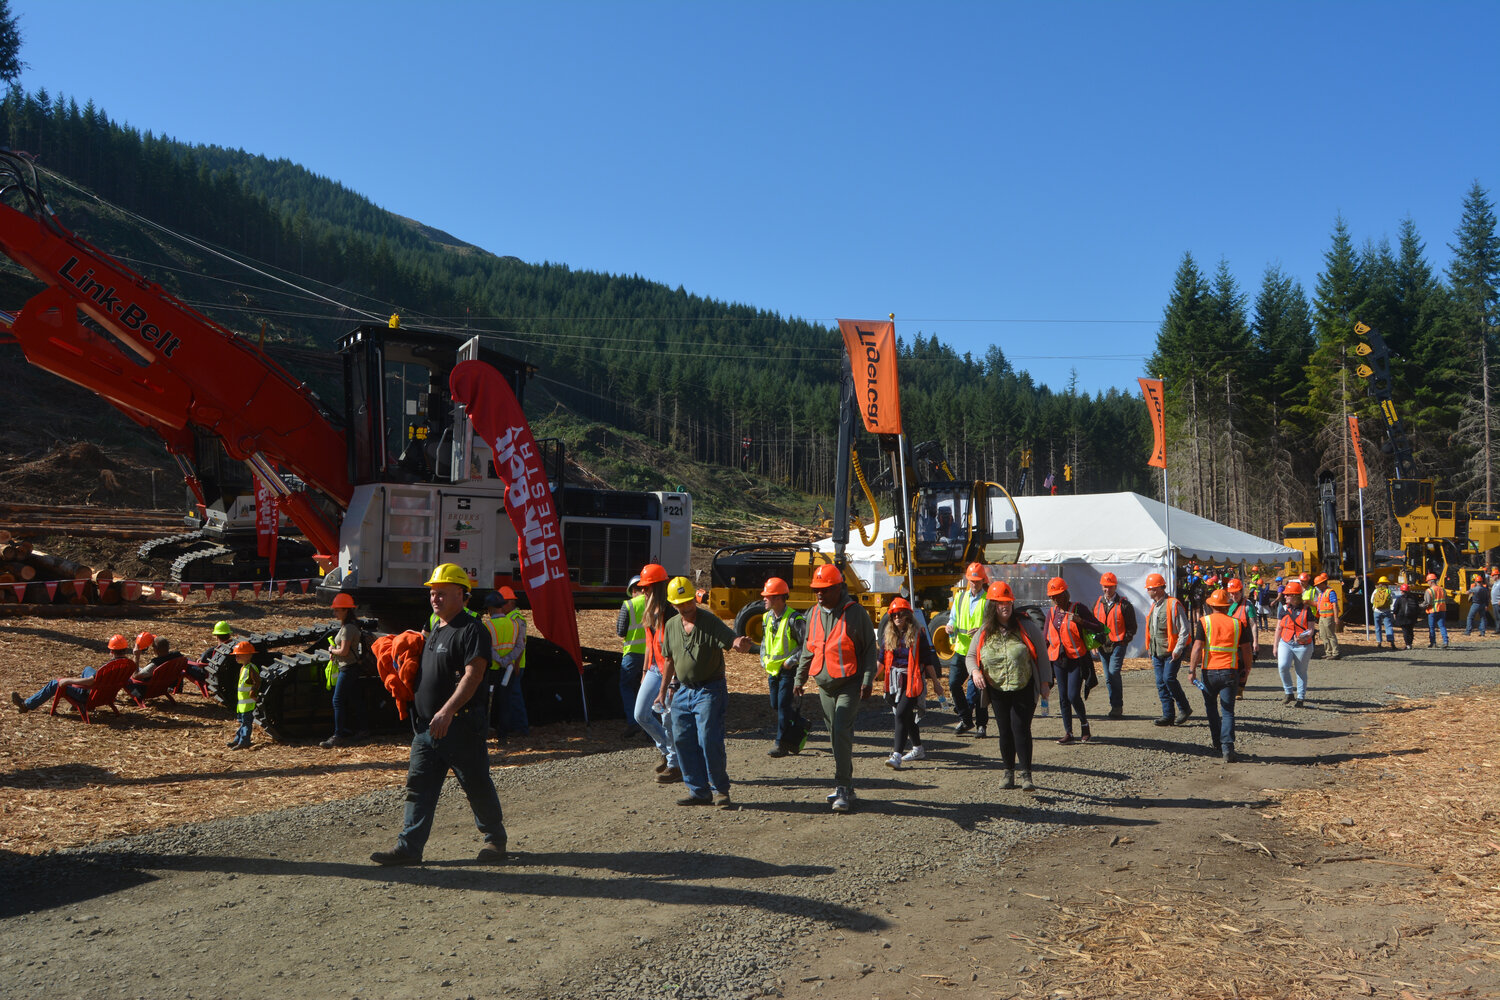 A tour of students walks through the Pacific Logging Congress Live In-Woods Show on Sept. 22.